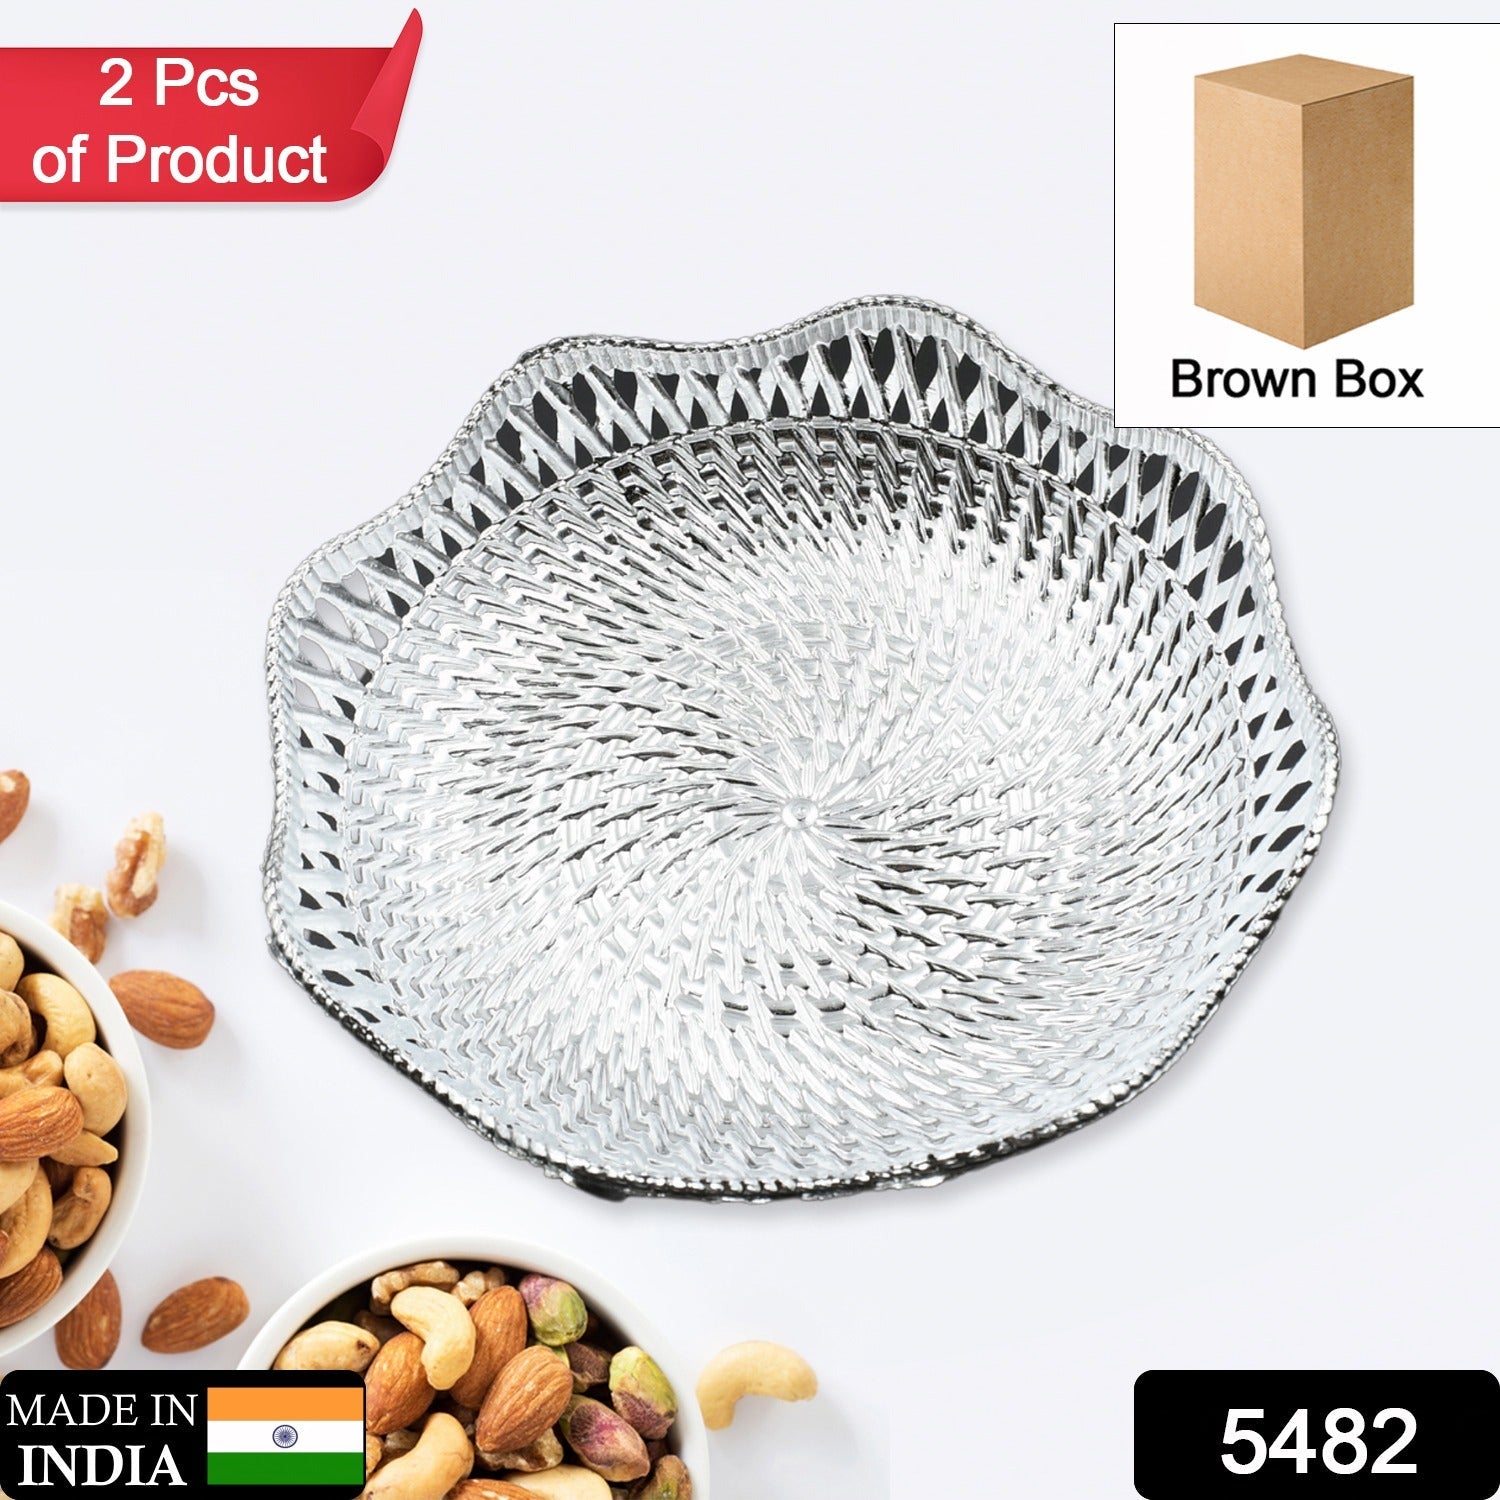 5482 Round Serving Tray, Traditional Serving Tray, Multipurpose Serving Tray, Decorative Serving Platters, Mukhwas Serving Tray (2 Pc Set)